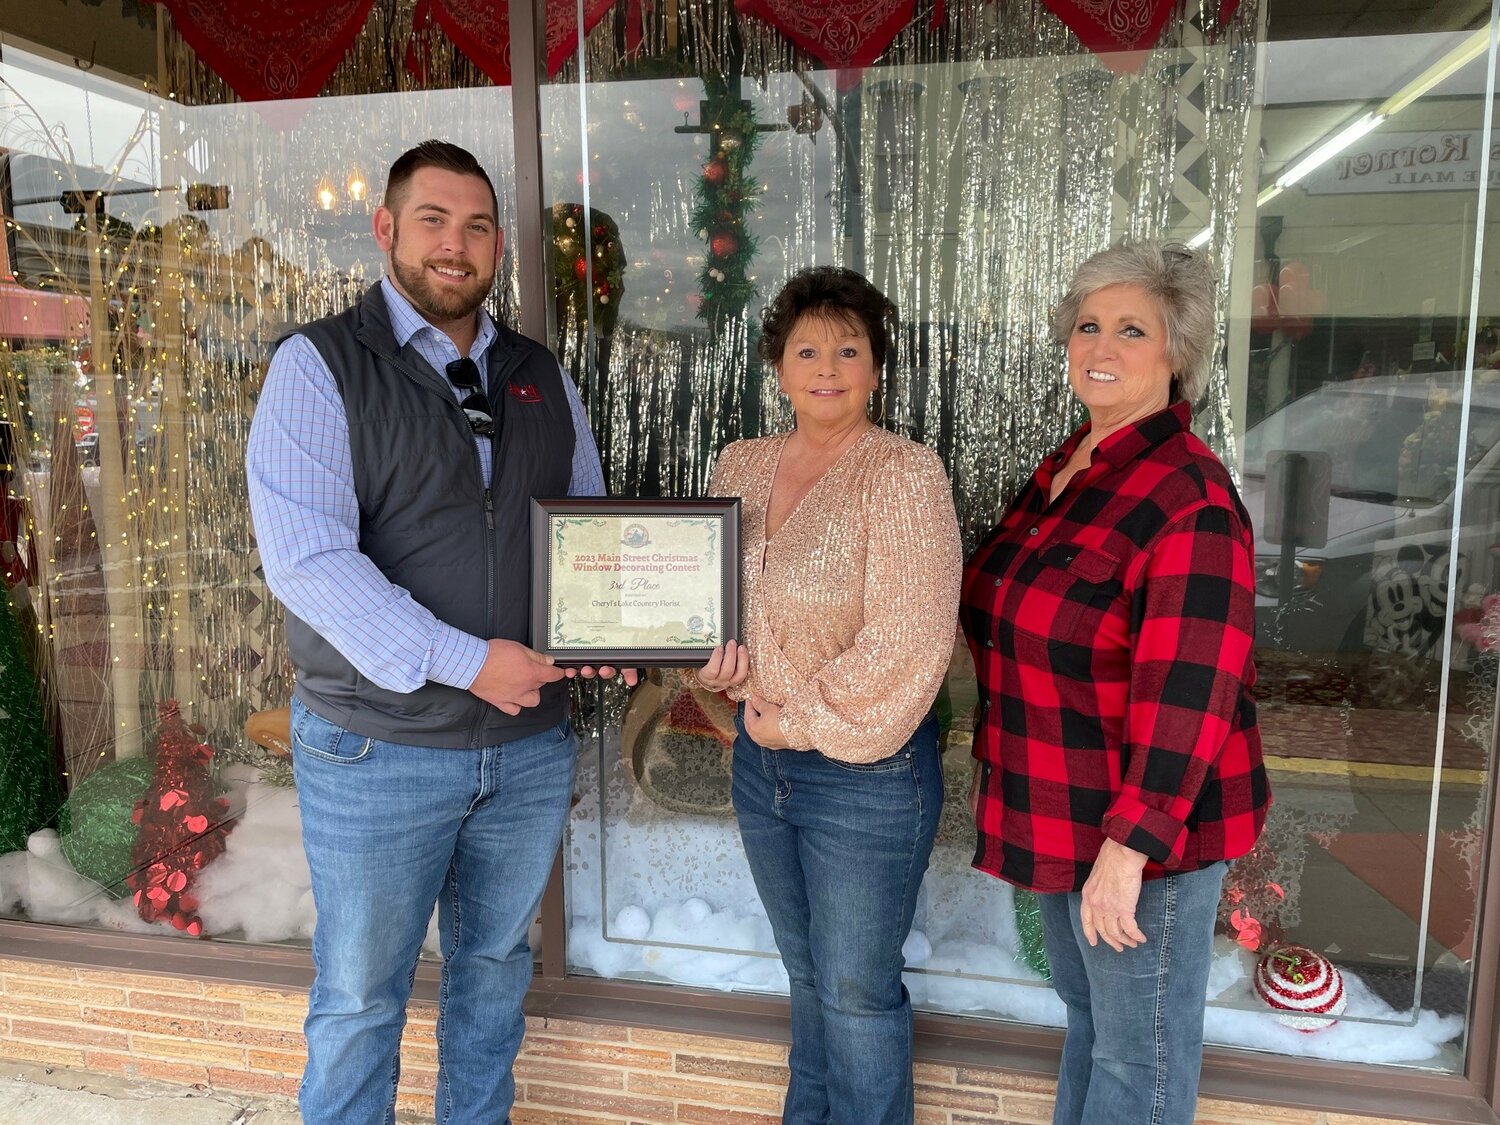 Main Street Chairman Nic Watkins presented the certificate to owner Cheryl Wood and her assistant Rose Petra.